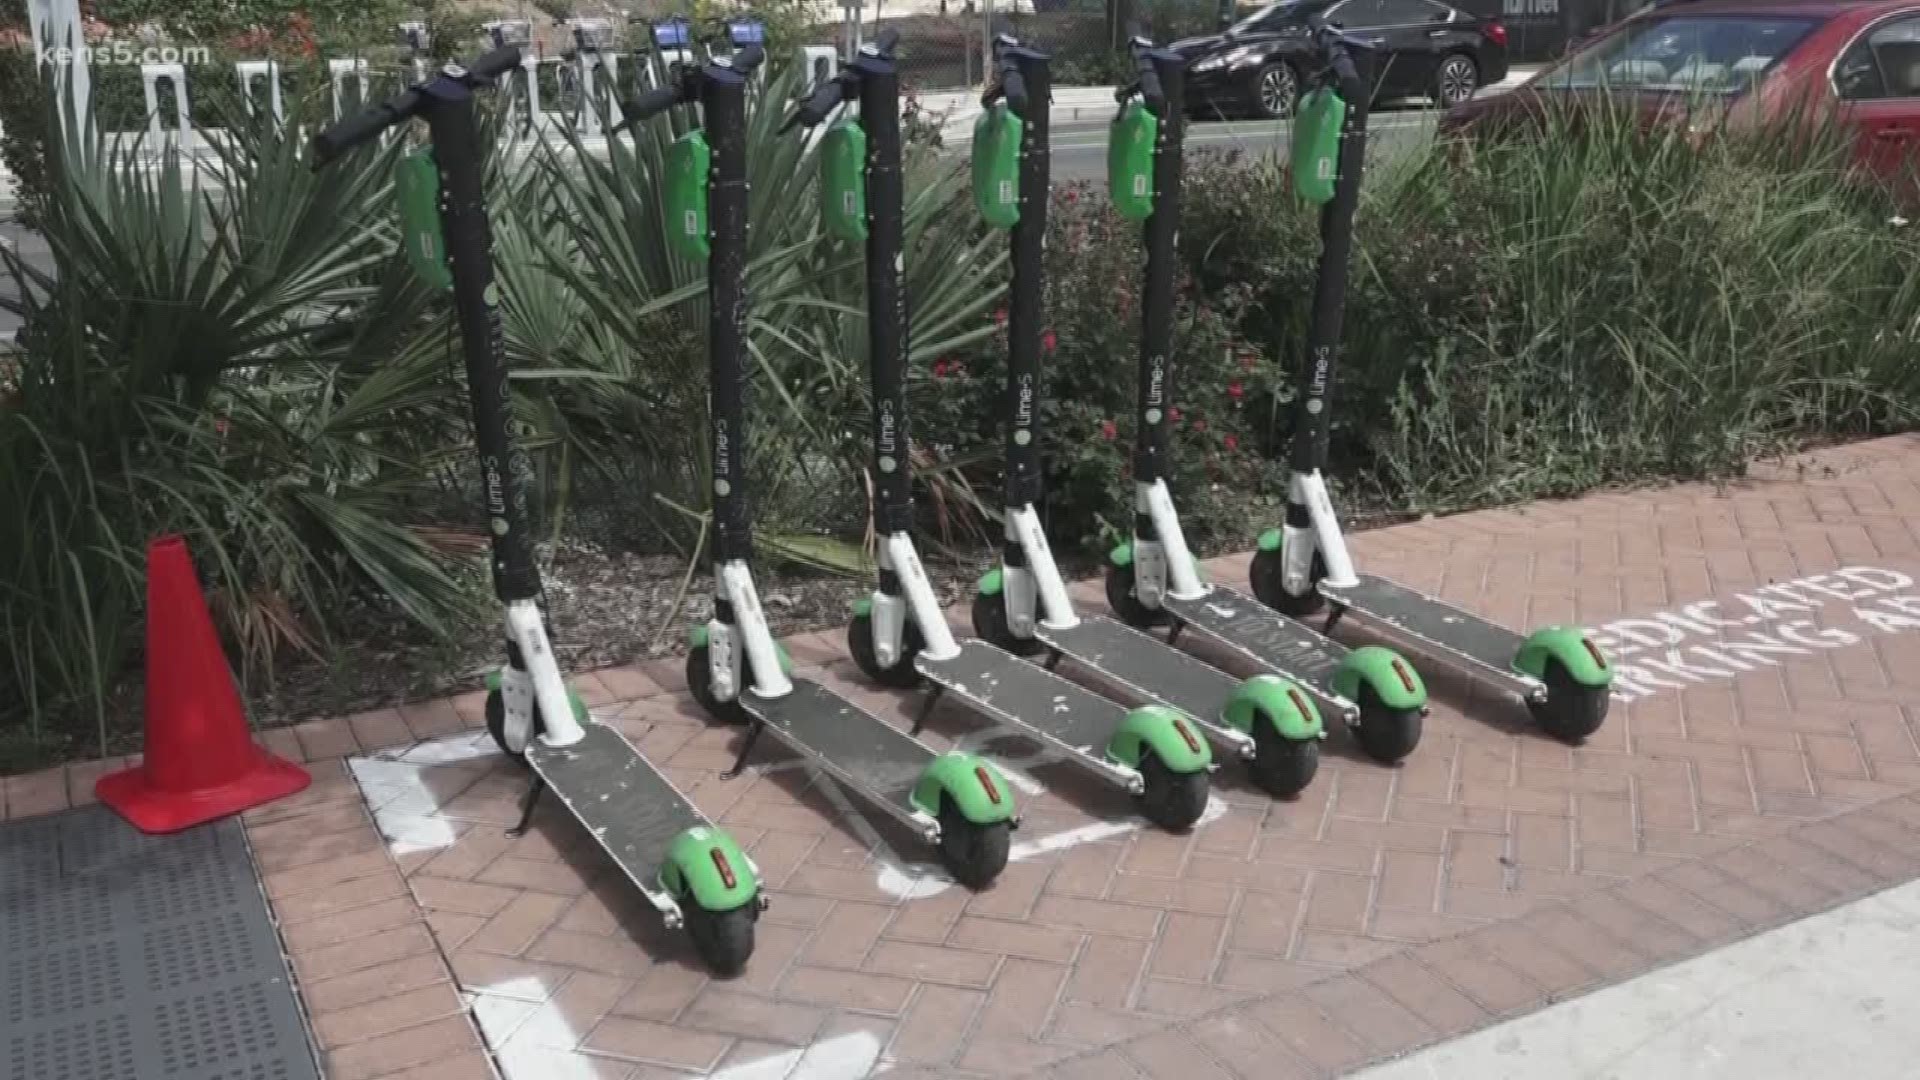 For the past year, we've seen scooter riders on their wheels on San Antonio sidewalks. That won't be the case anymore, thanks to a new ordinance now in effect